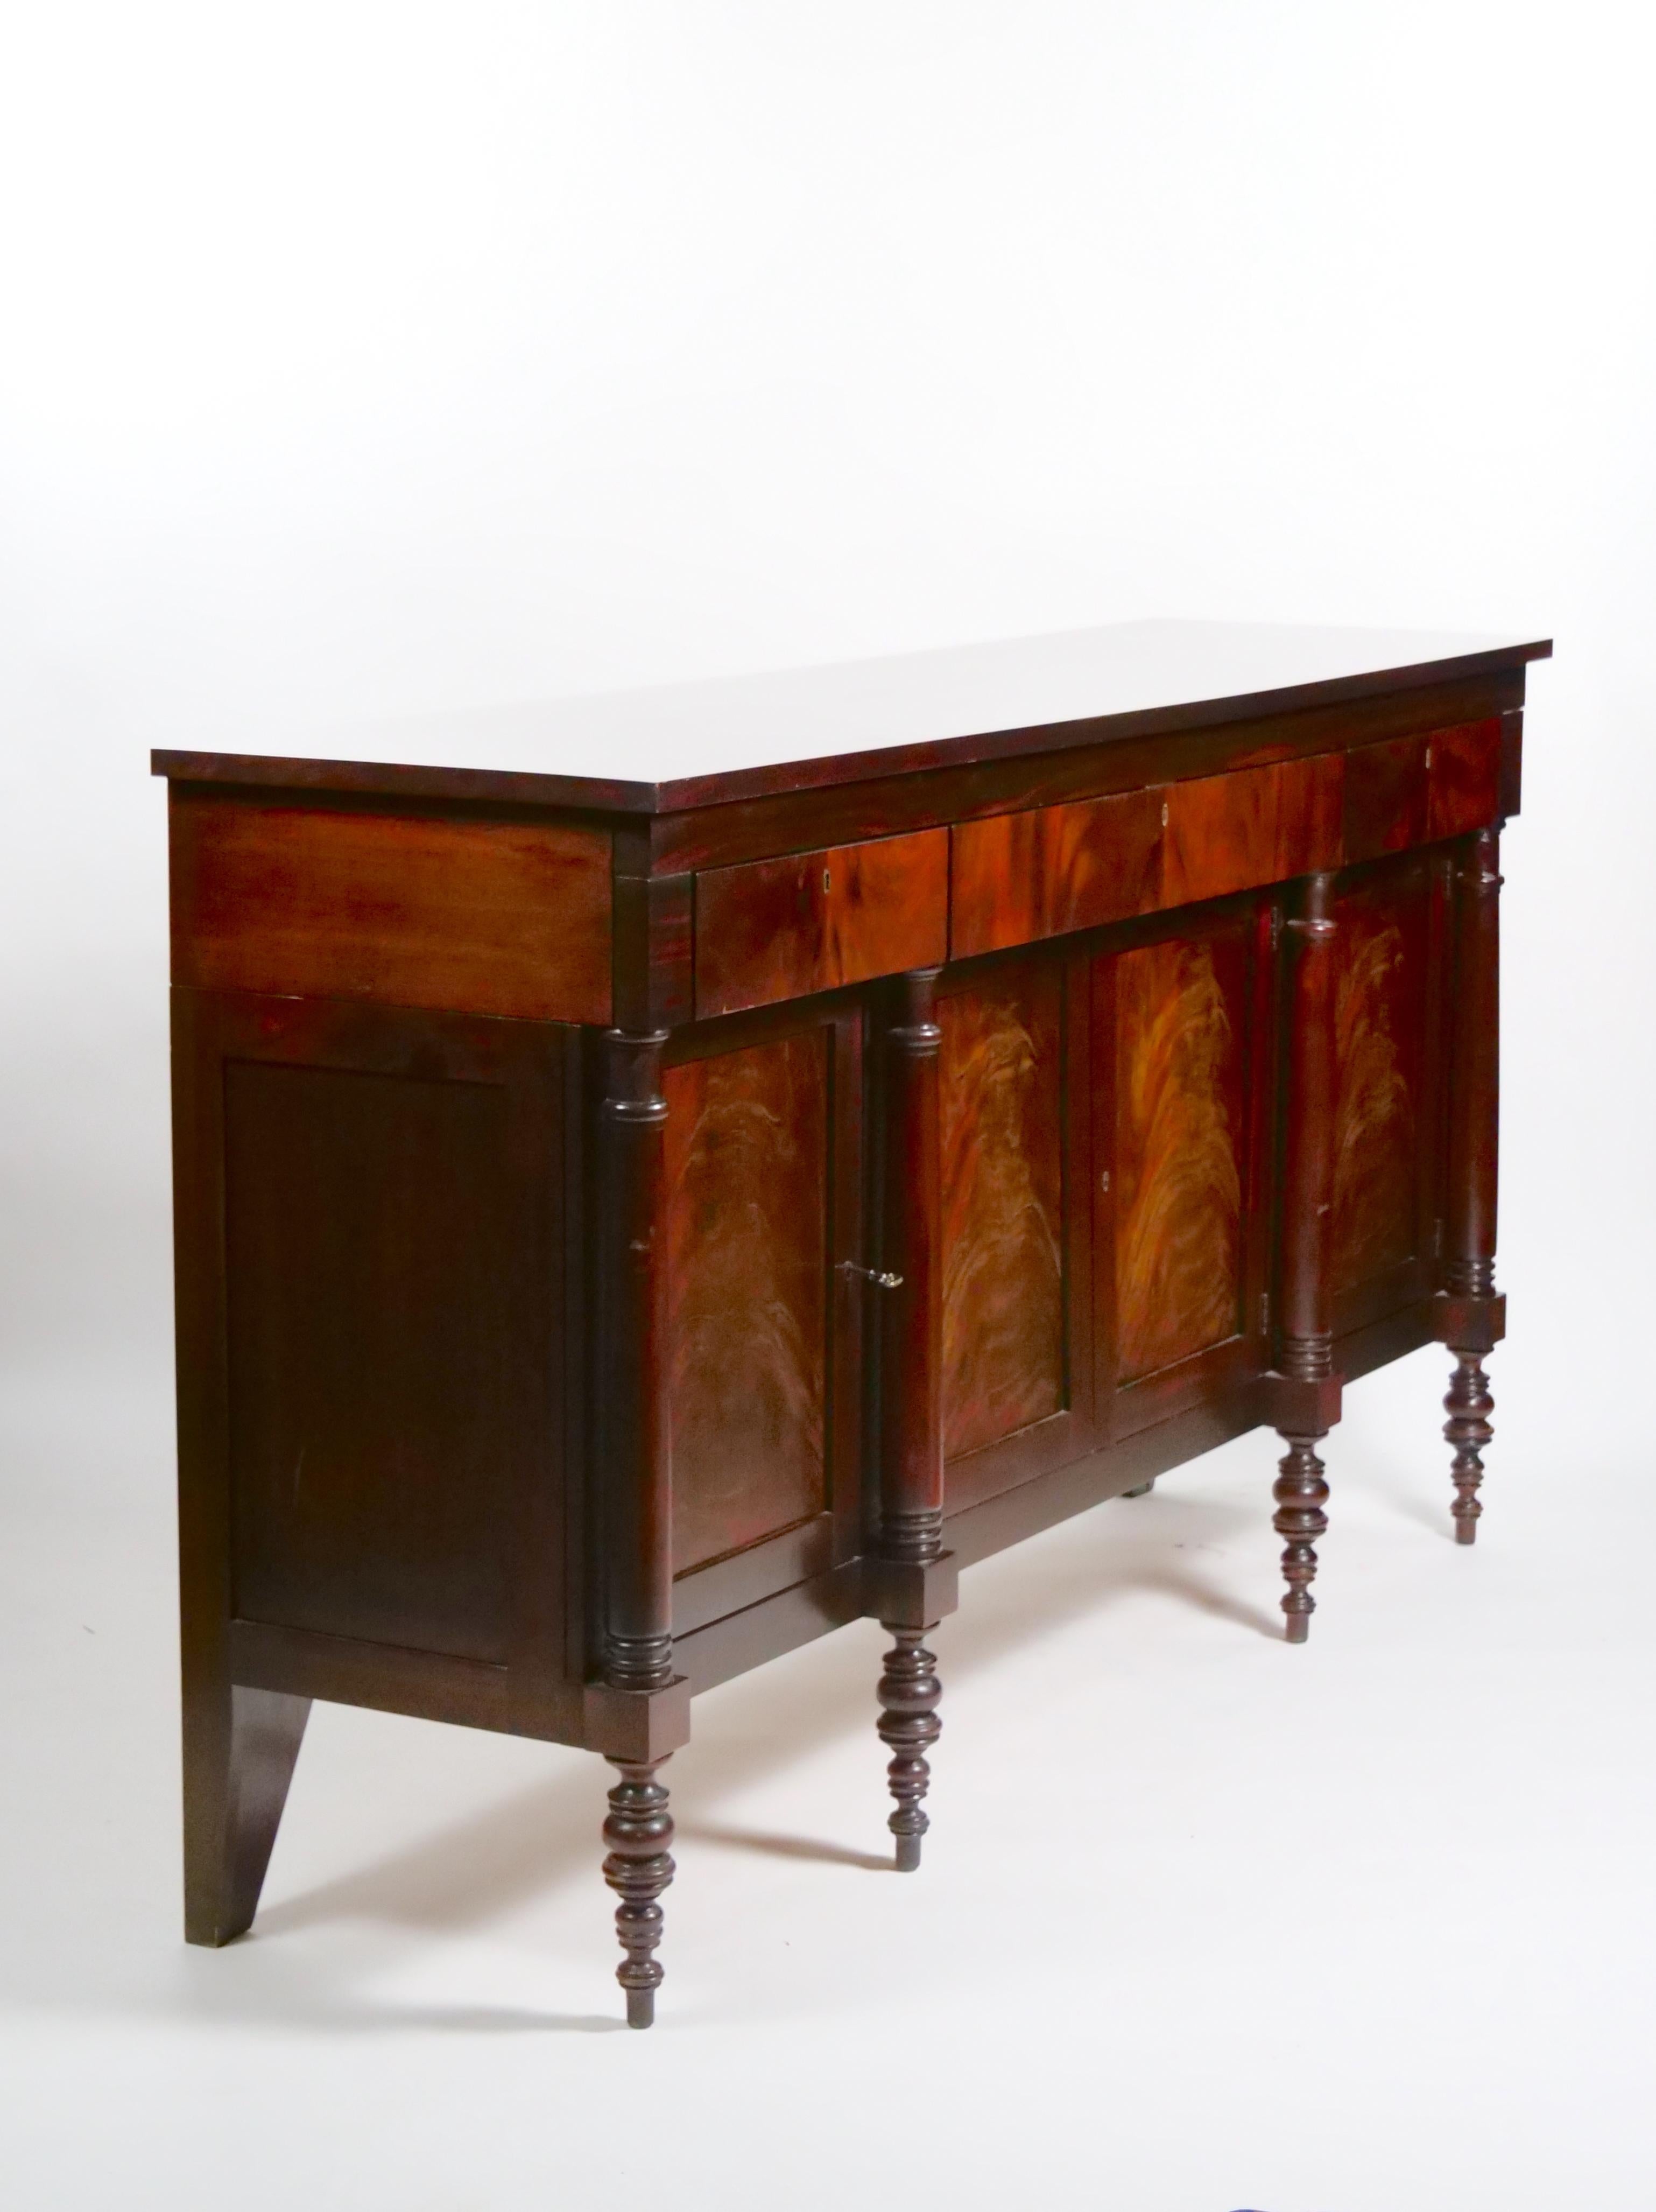 Elevate your dining room with this Beautiful Mahogany Wood Georgian Style Credenza or Sideboard, a fine example of craftsmanship and classic design.
Crafted from solid mahogany, this piece exudes quality and elegance, with a design that pays homage